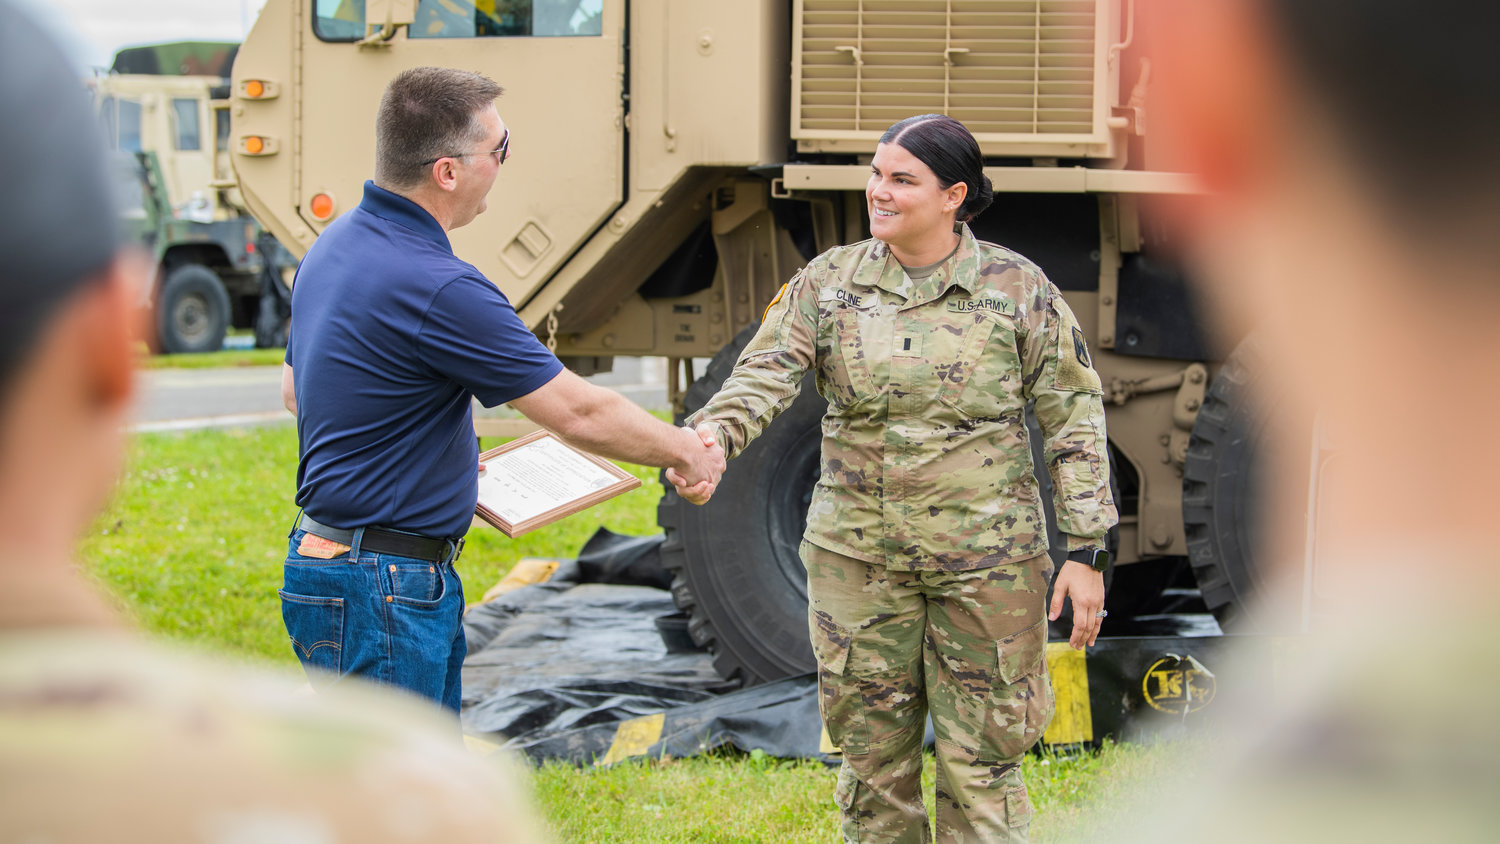 Brandon Rakes is recognized with a certificate of appreciation from Apollo Company as he shakes hands with United States Army First Lieutenant Savannah Cline at the Chehalis-Centralia Airport during a military training exercise Wednesday in Chehalis.